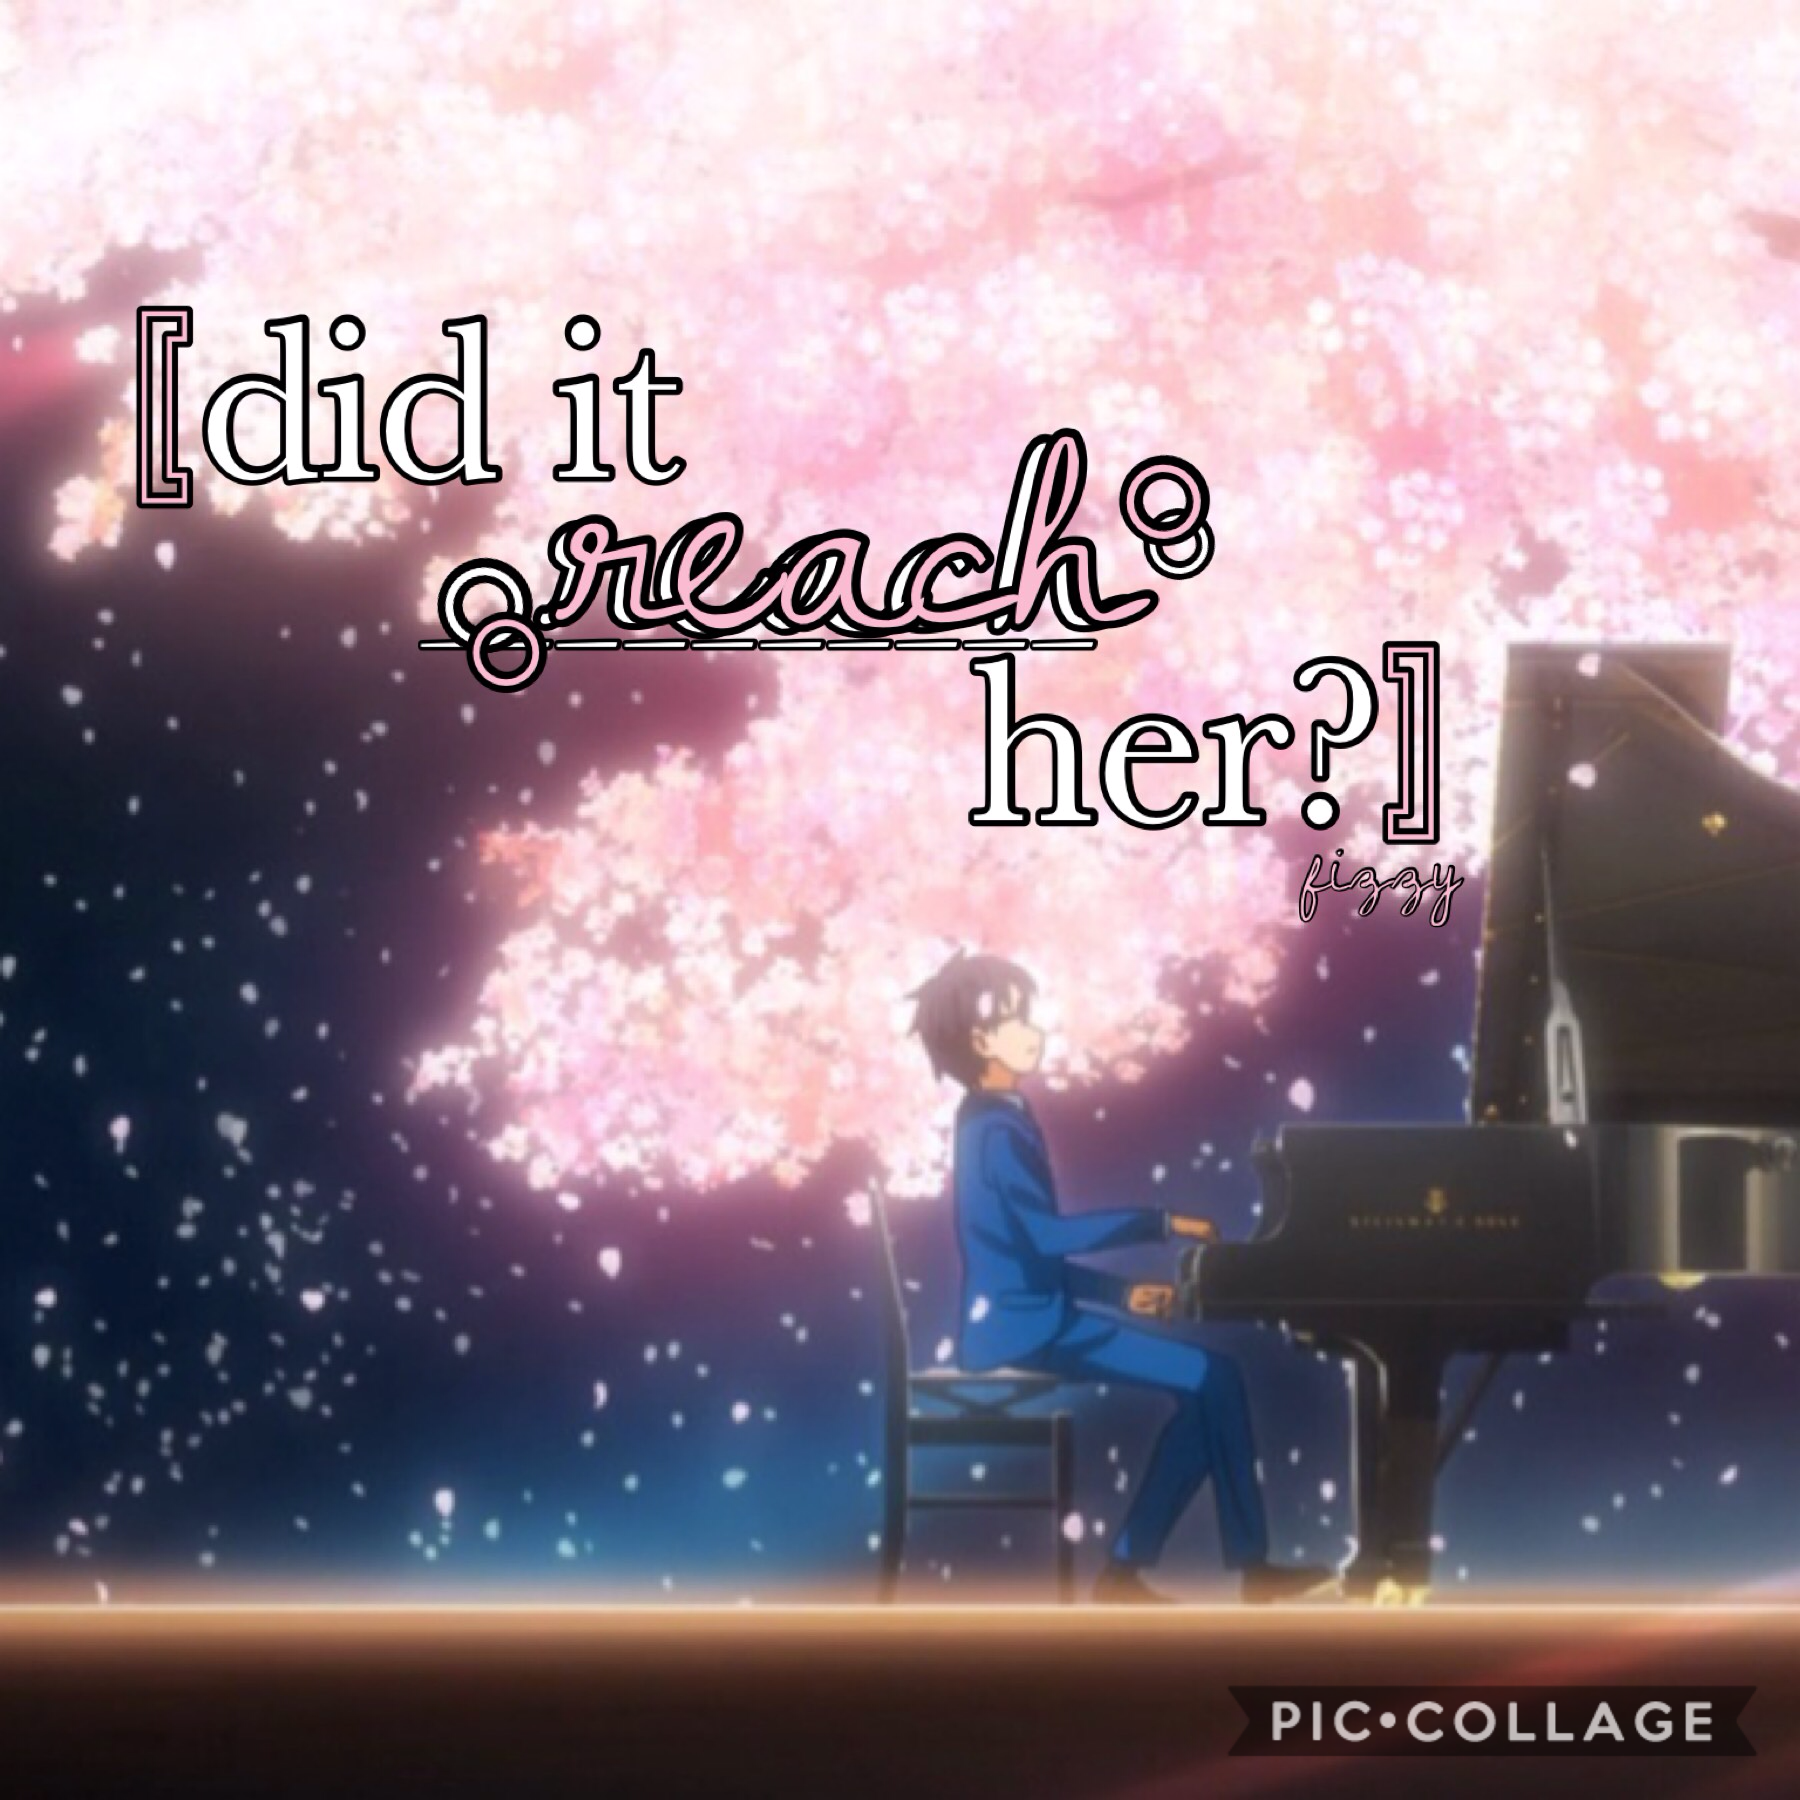 TAP
This is from "Your Lie in April" and I HIGHLY recommend it! I cried so hard while watching this, and it gave me the chills so many times.
QOTD: Kermit or Dat Boi?
AOTD:Kermit